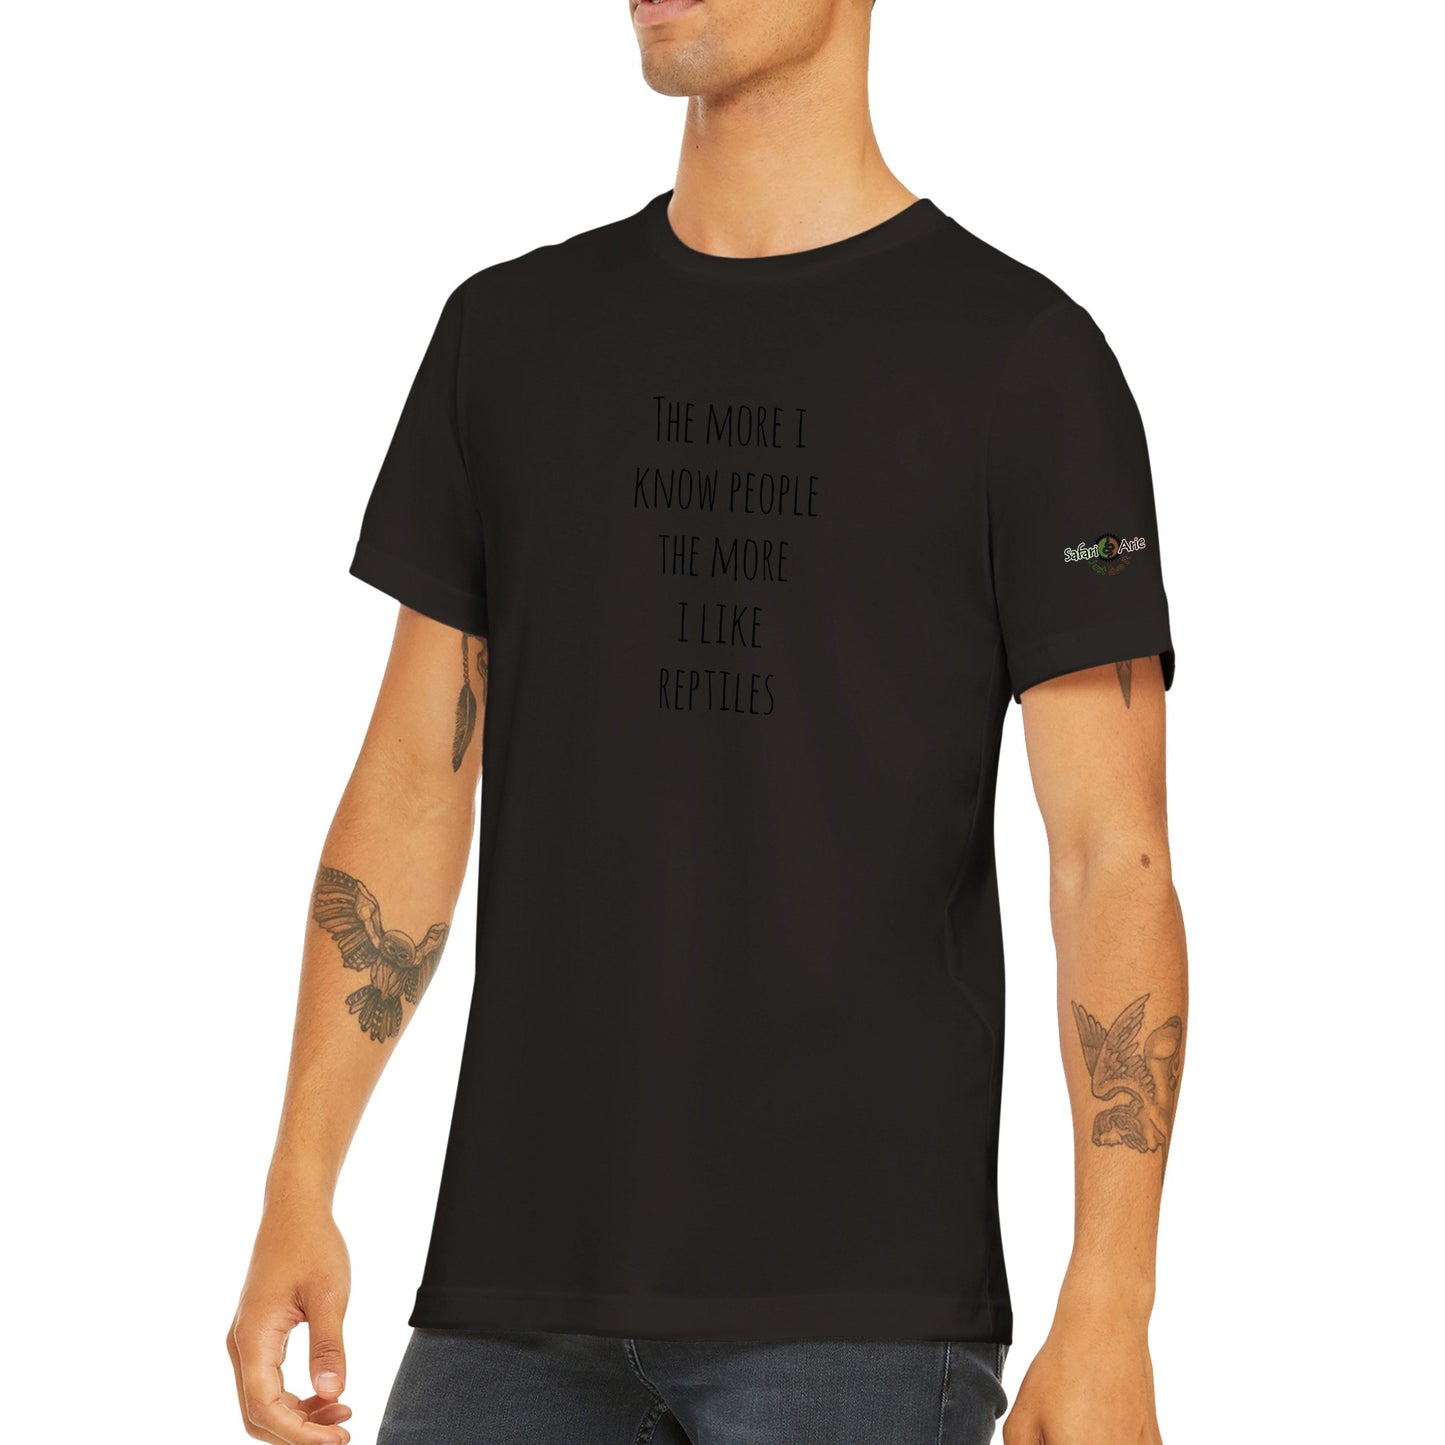 The more I know people the more I like reptiles unisex t-shirt